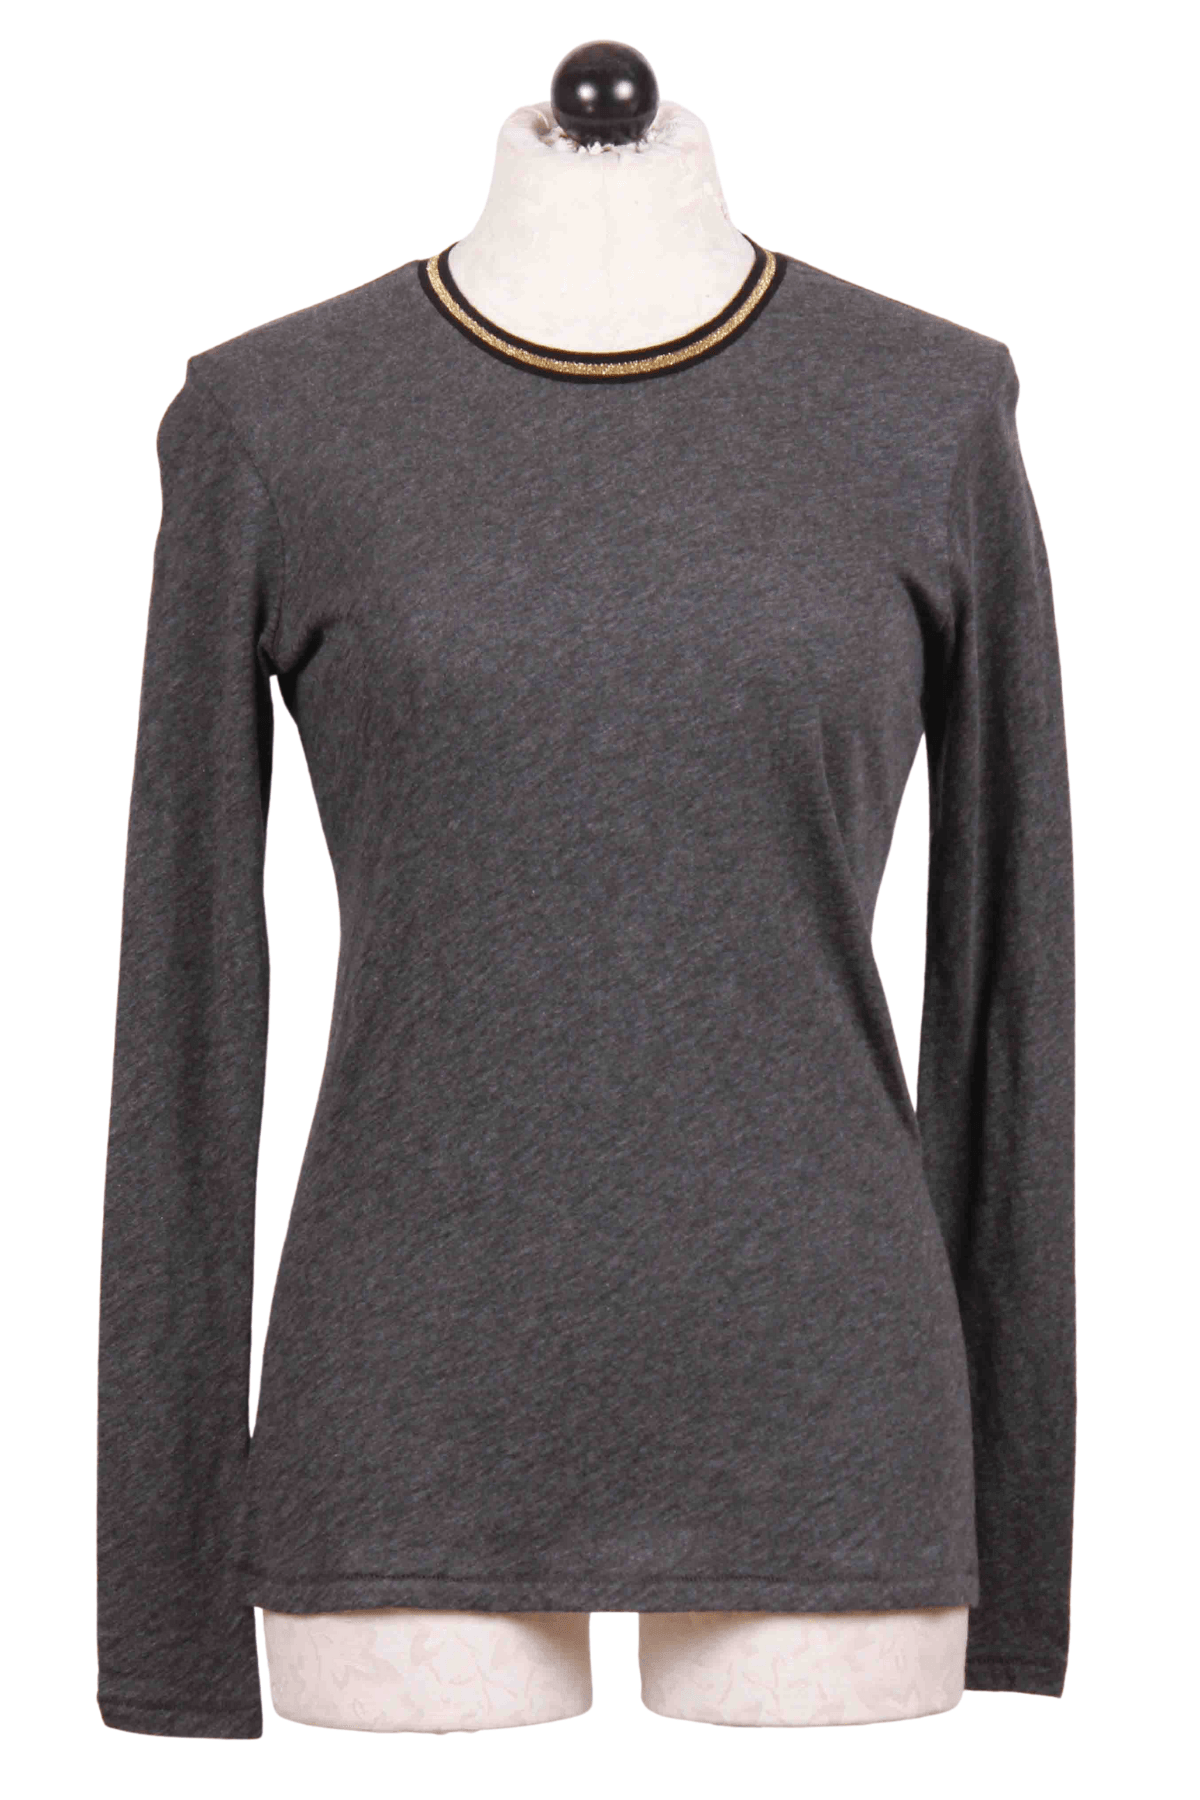 charcoal grey Gold Tipped Ringer Tee by Goldie LeWinter